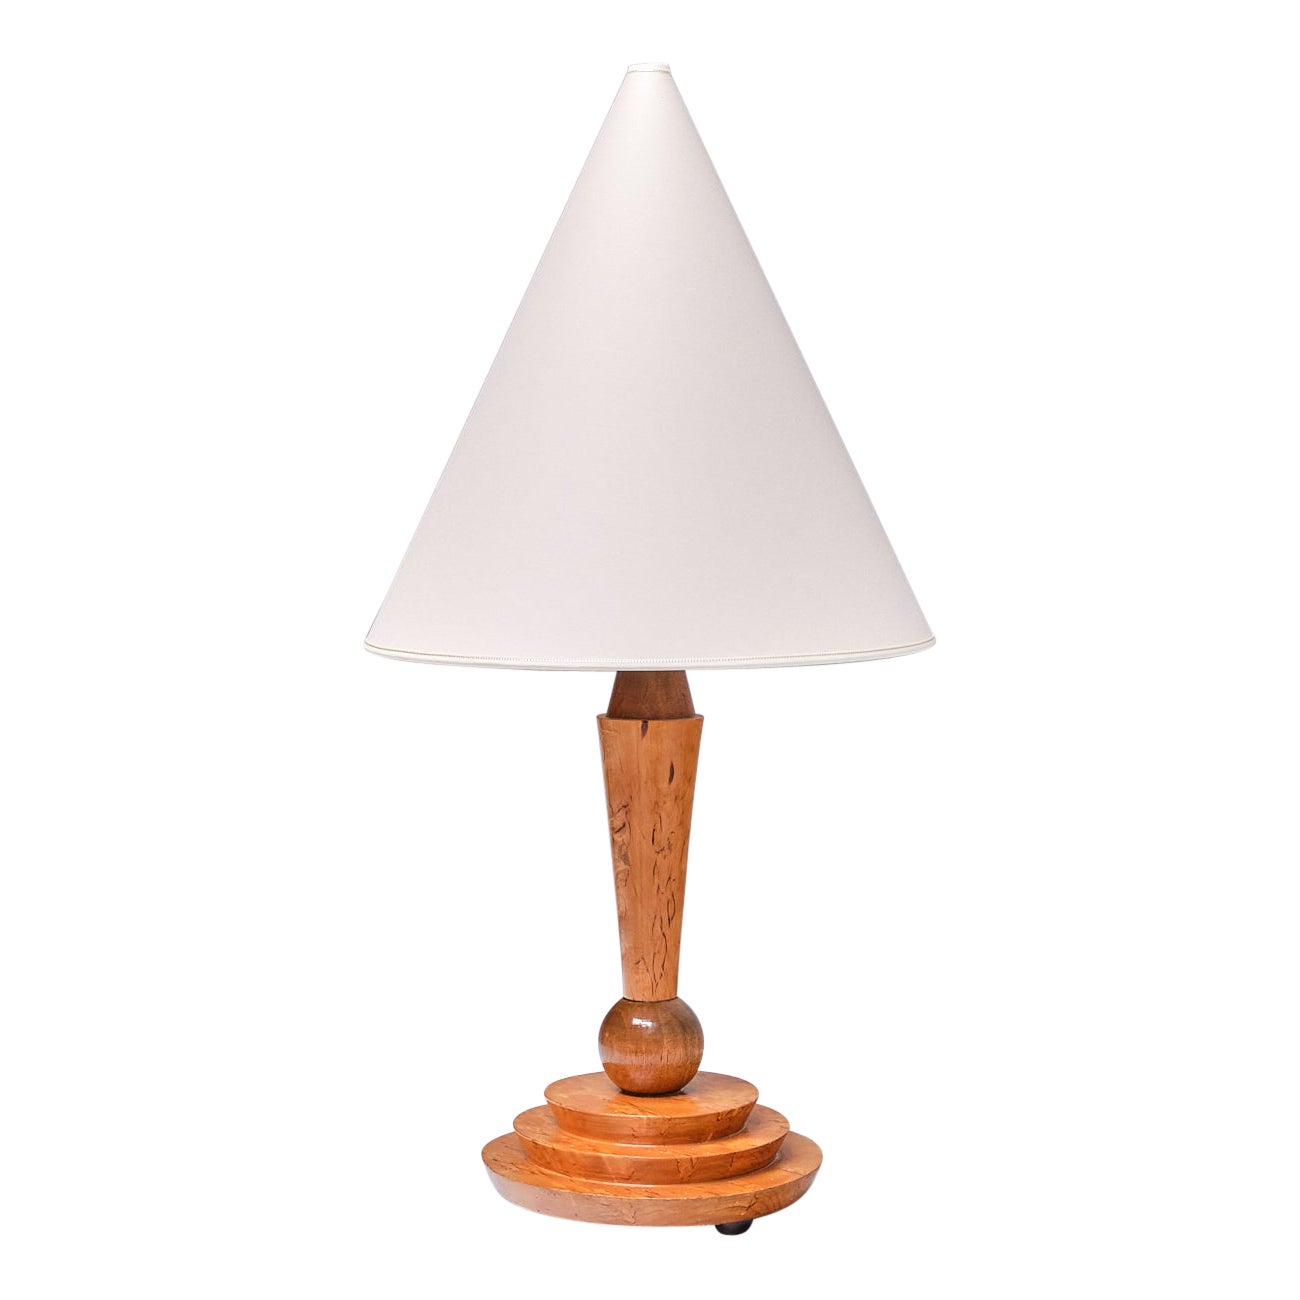 Art Deco Table Lamp in Birdseye Maple with Ivory Colored Shade, Austria, 1930s For Sale